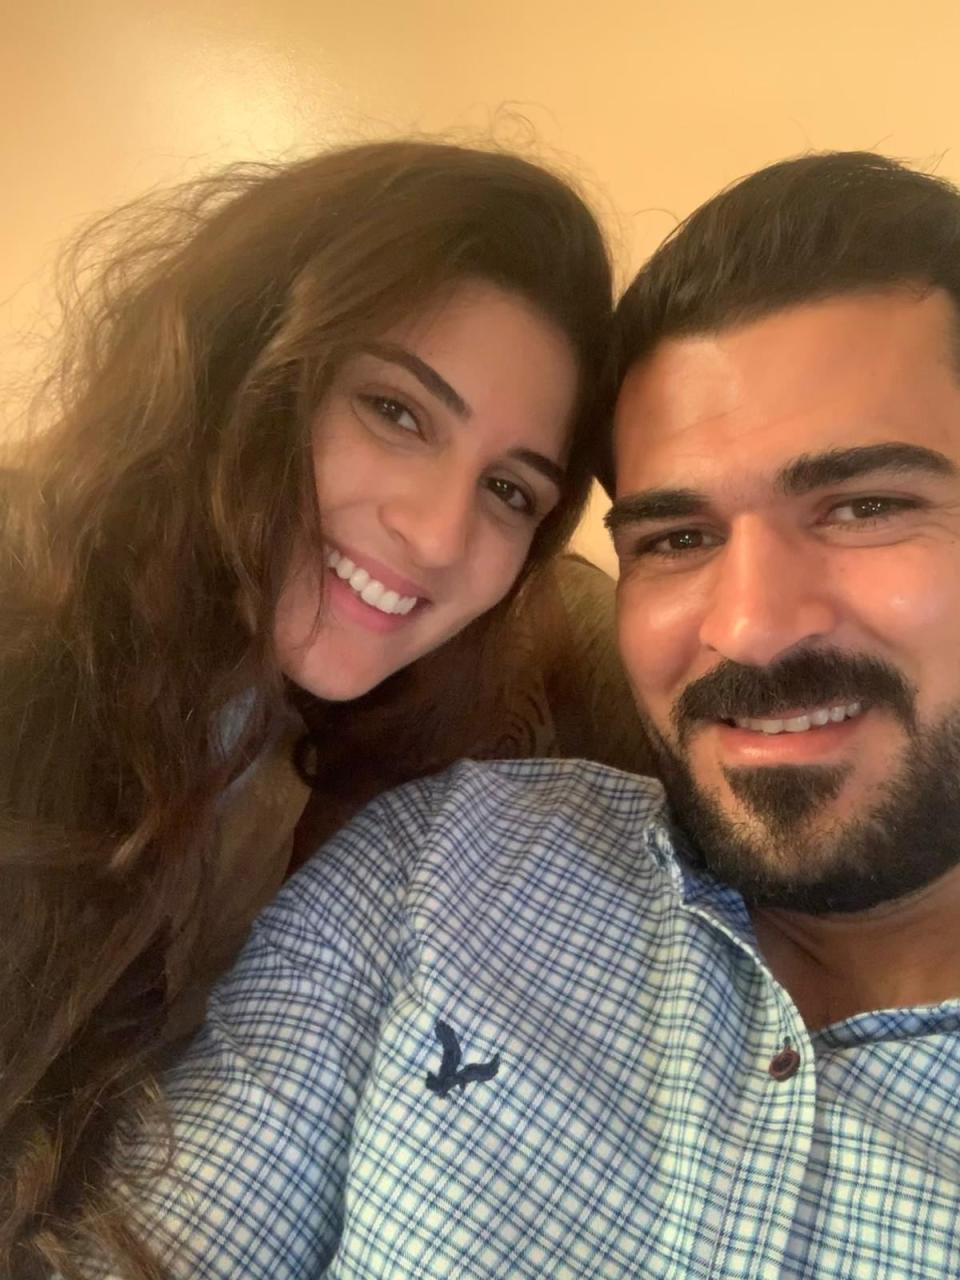 Palestinian-Canadian Shouq Alnajjar with her husband Othman Alnajjar. She is currently in Cairo and hoping her husband's mother can be added to the list of people approved to leave the Gaza Strip.